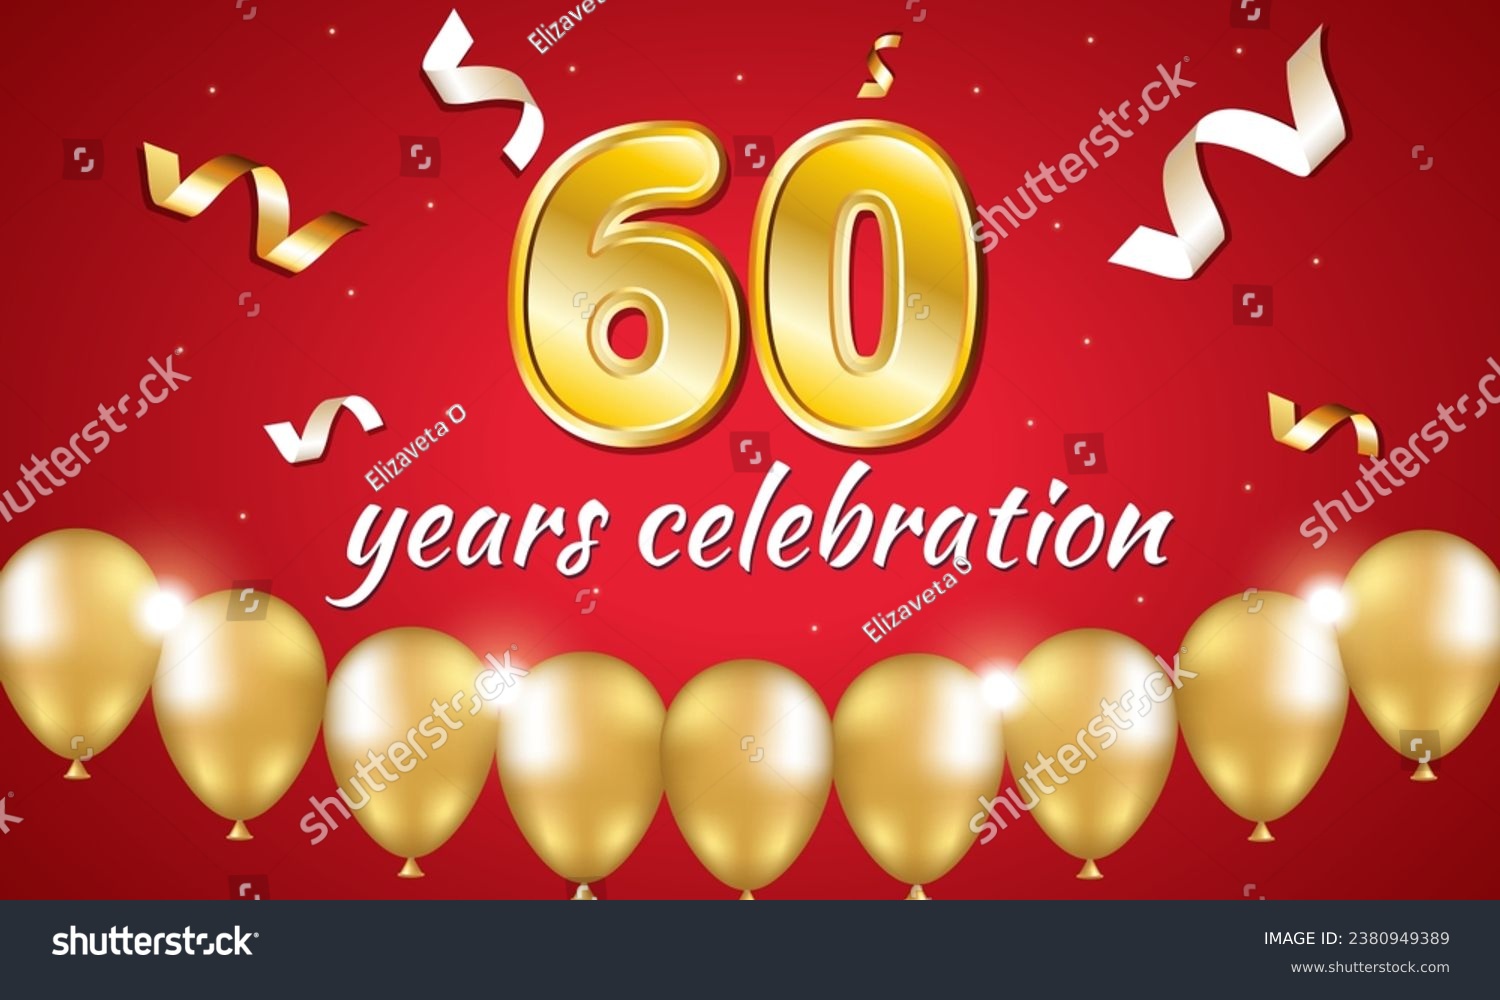 SVG of Numeral 60 years celebration on red background. Golden balloons and streamers.
 svg